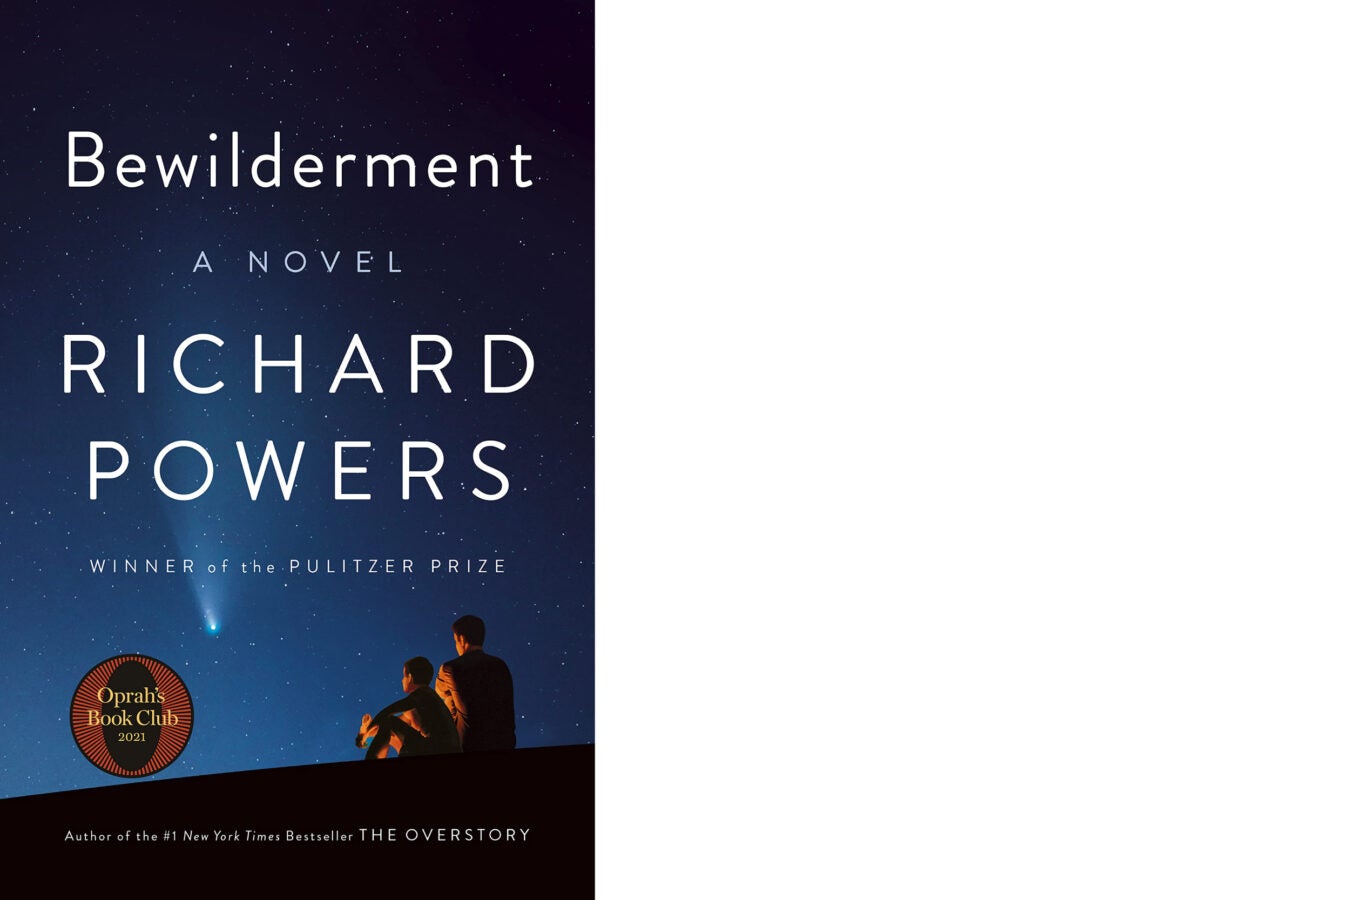 Book covers: “Bewilderment” by Richard Powers.